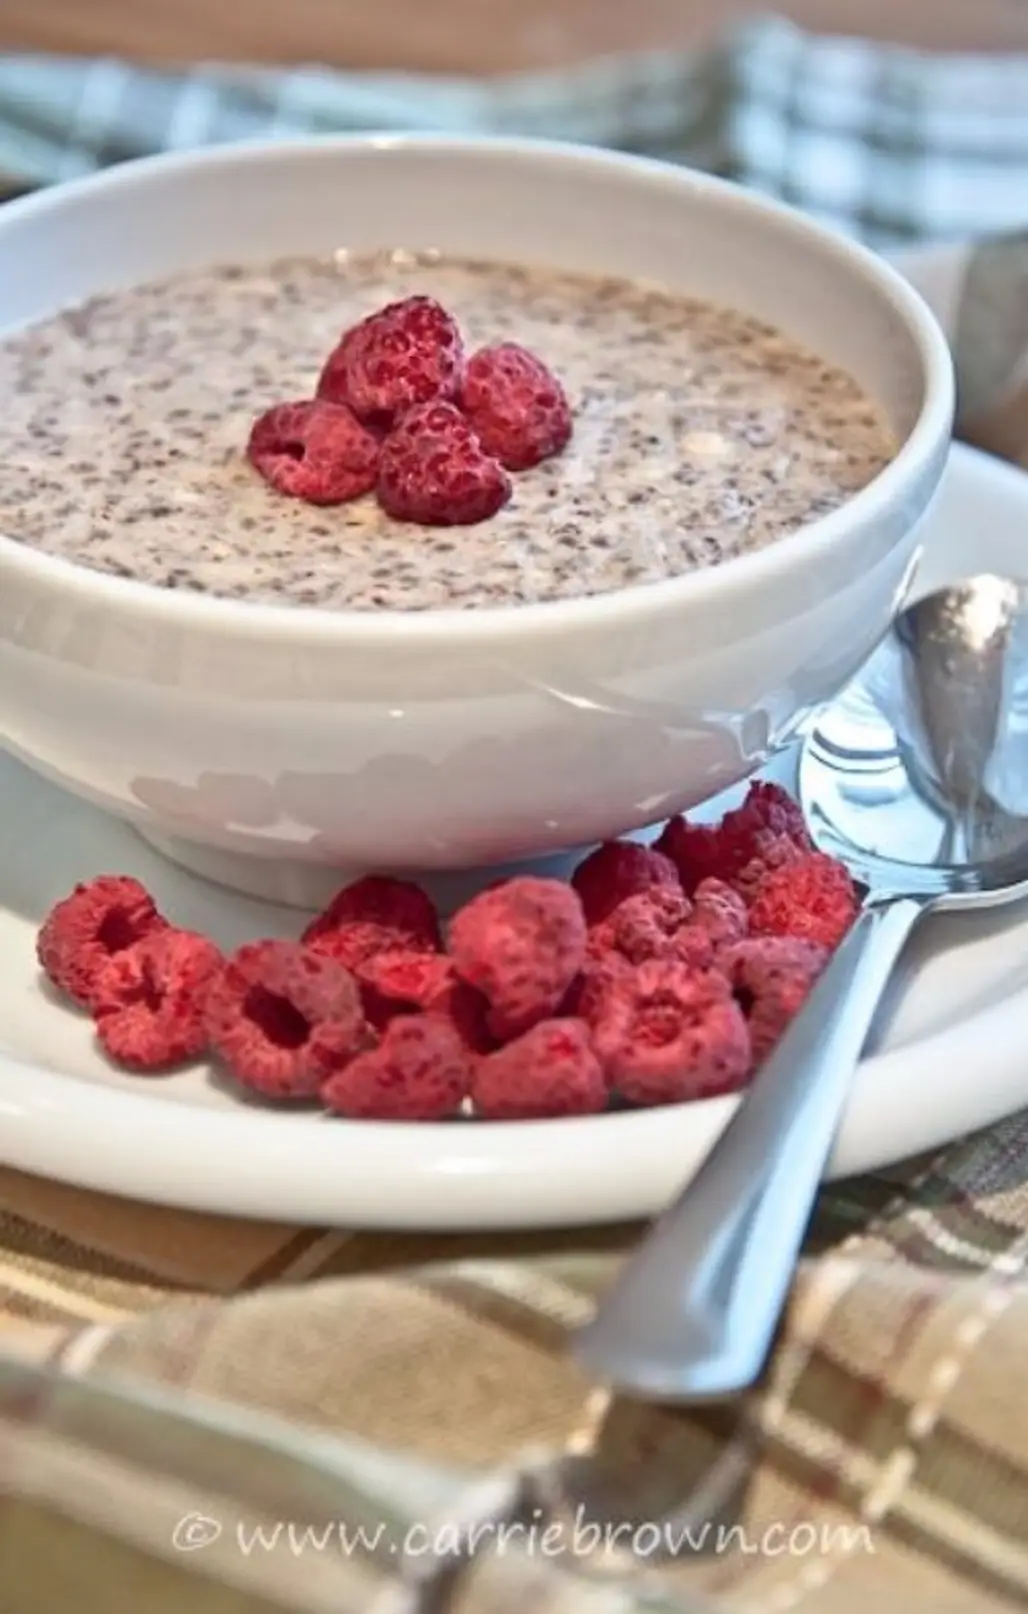 Hot and Nutty Cereal